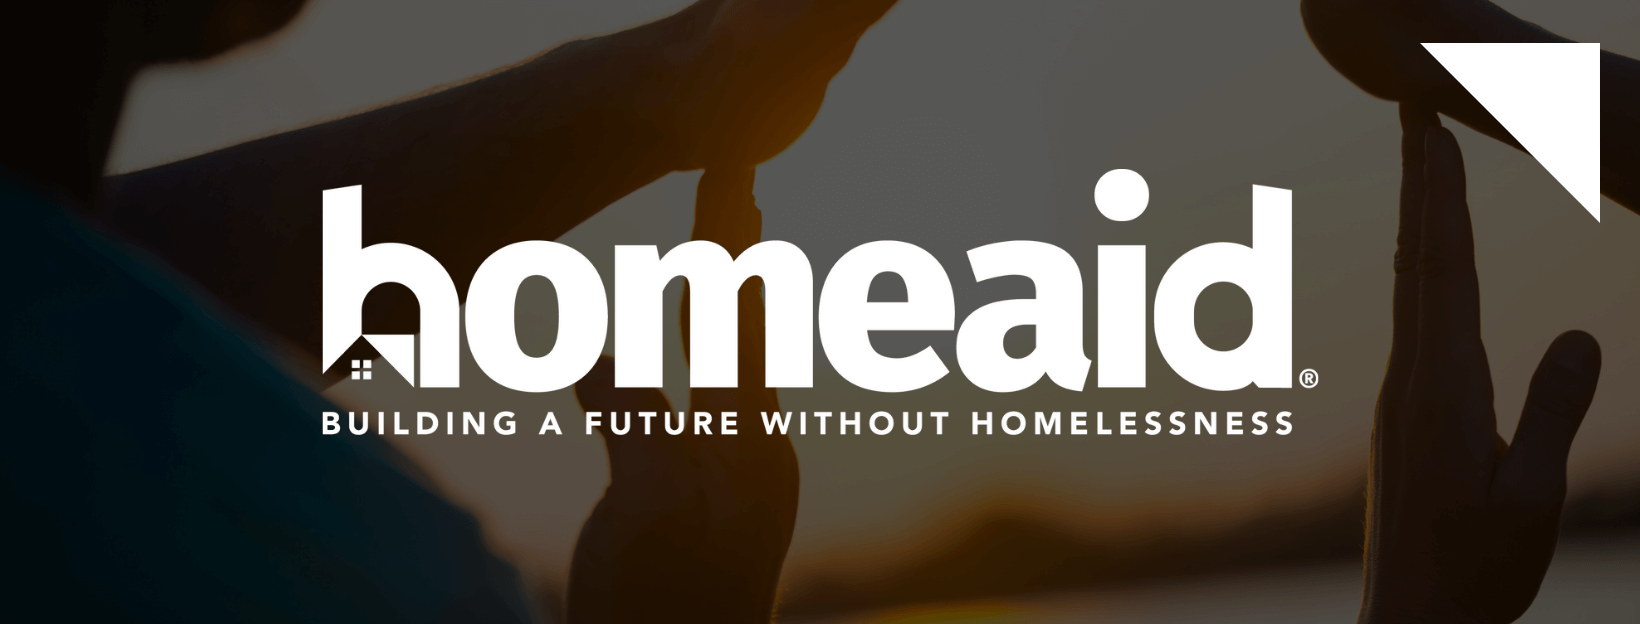 homeaid is a charity organization that is building a future without homelessness